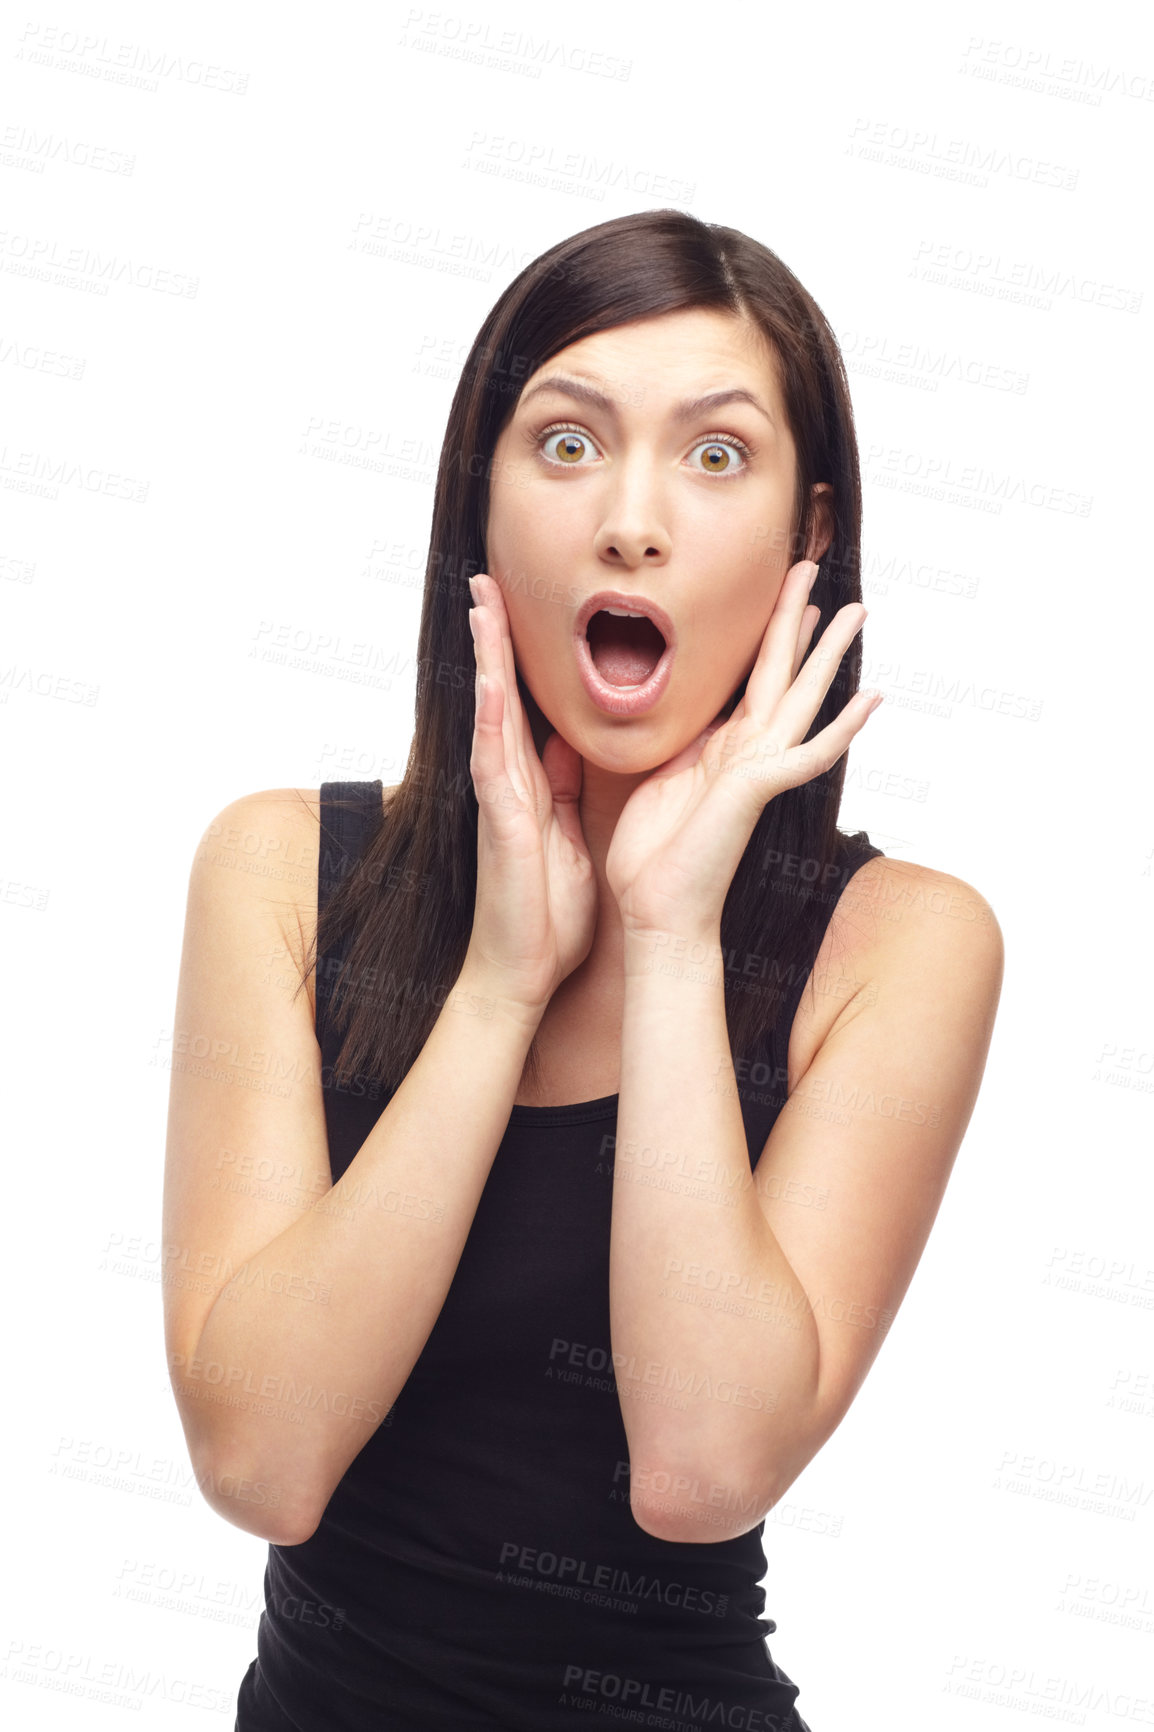 Buy stock photo A shocked young woman isolated on a white background